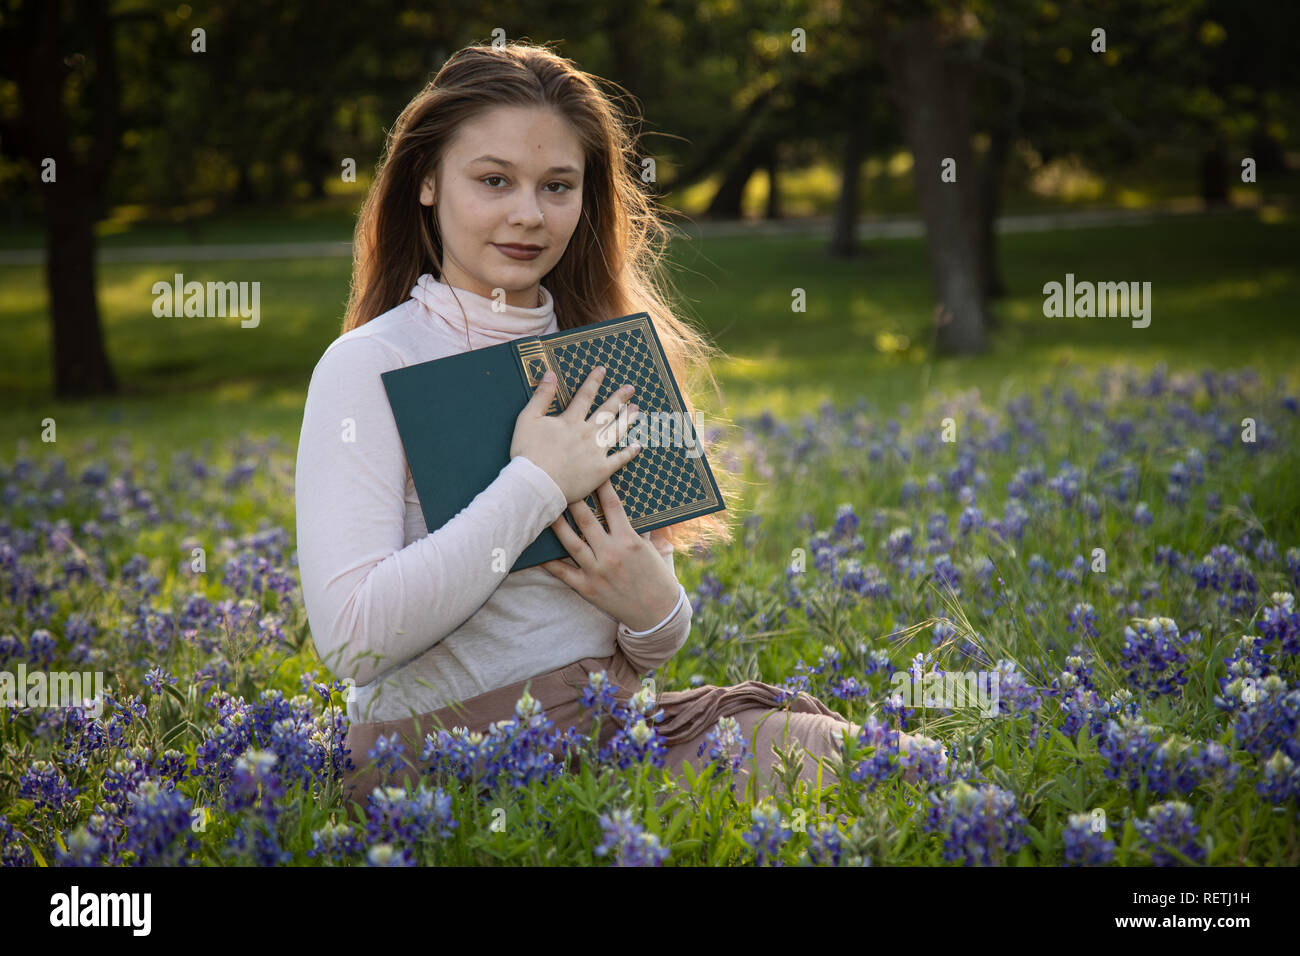 Girl Reading a book in bluebonnet flowers Stock Photo